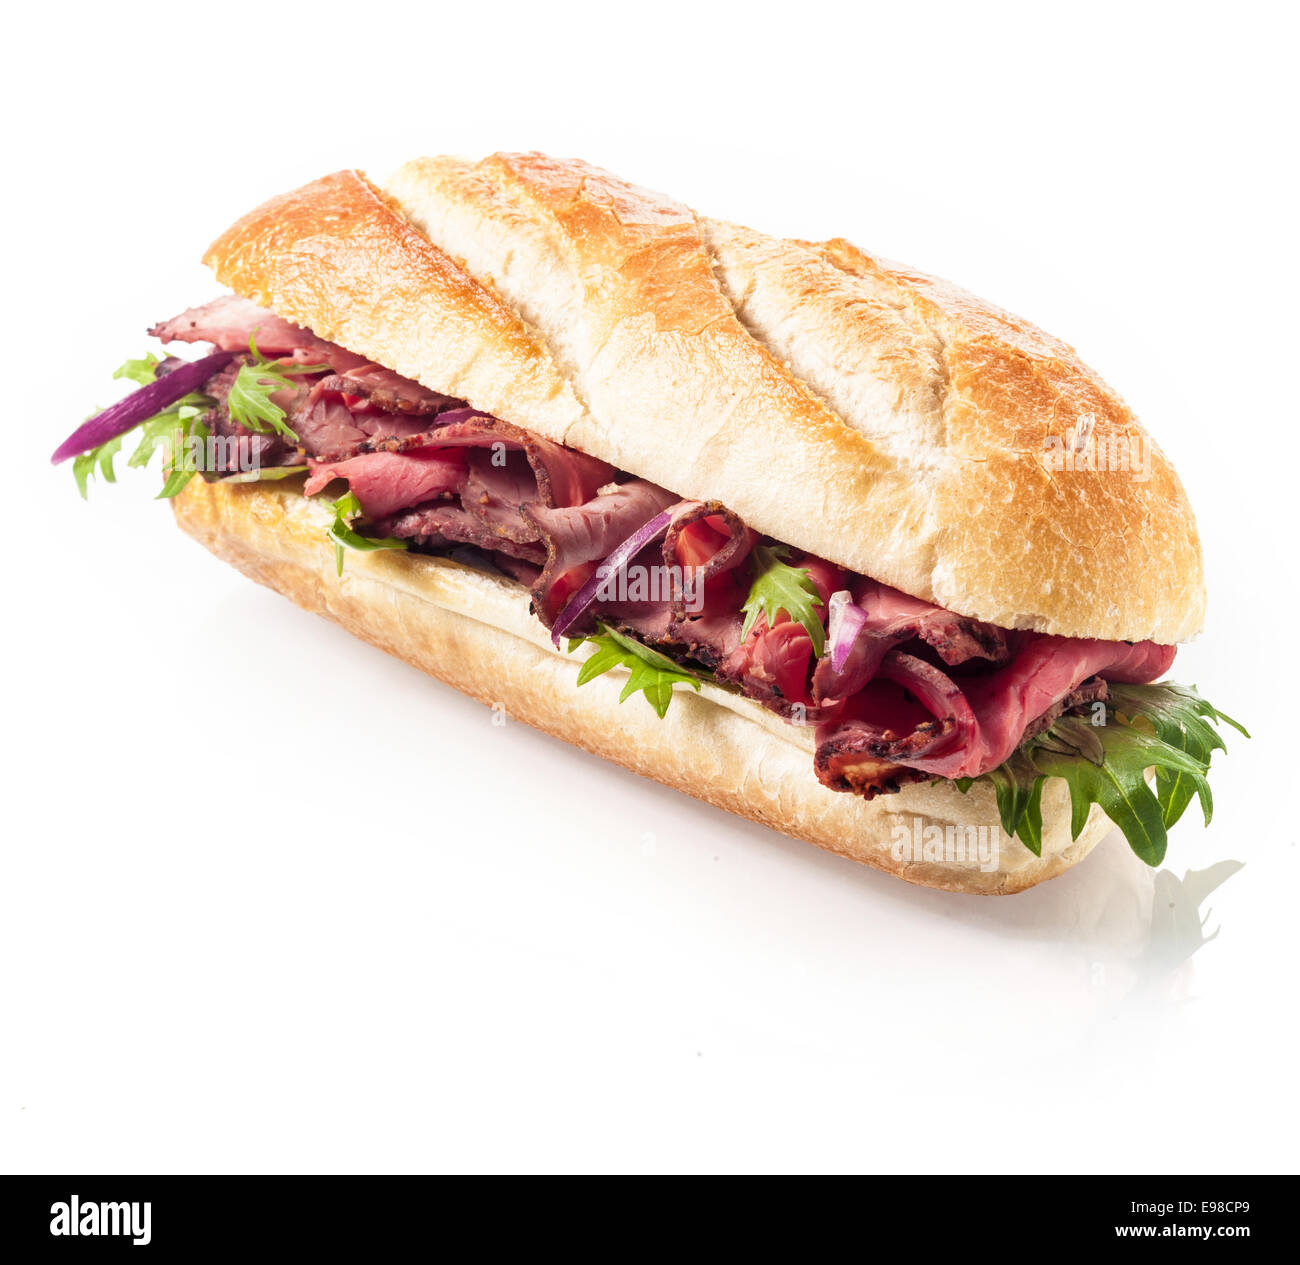 Healthy lean roast beef with leaves of fresh rocket on a freshly baked crusty roll or baguette viewed at an angle on a white background Stock Photo